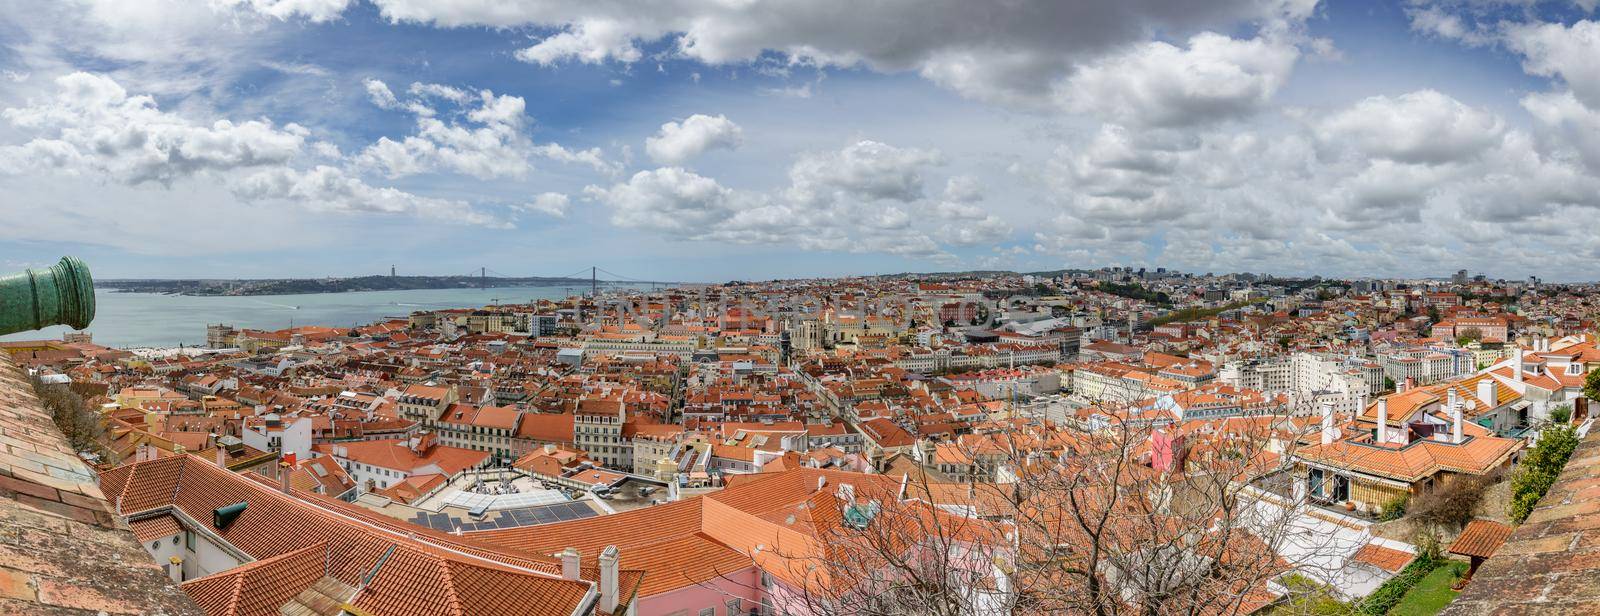 Ultra wide panoramic view of Lisbon by FerradalFCG